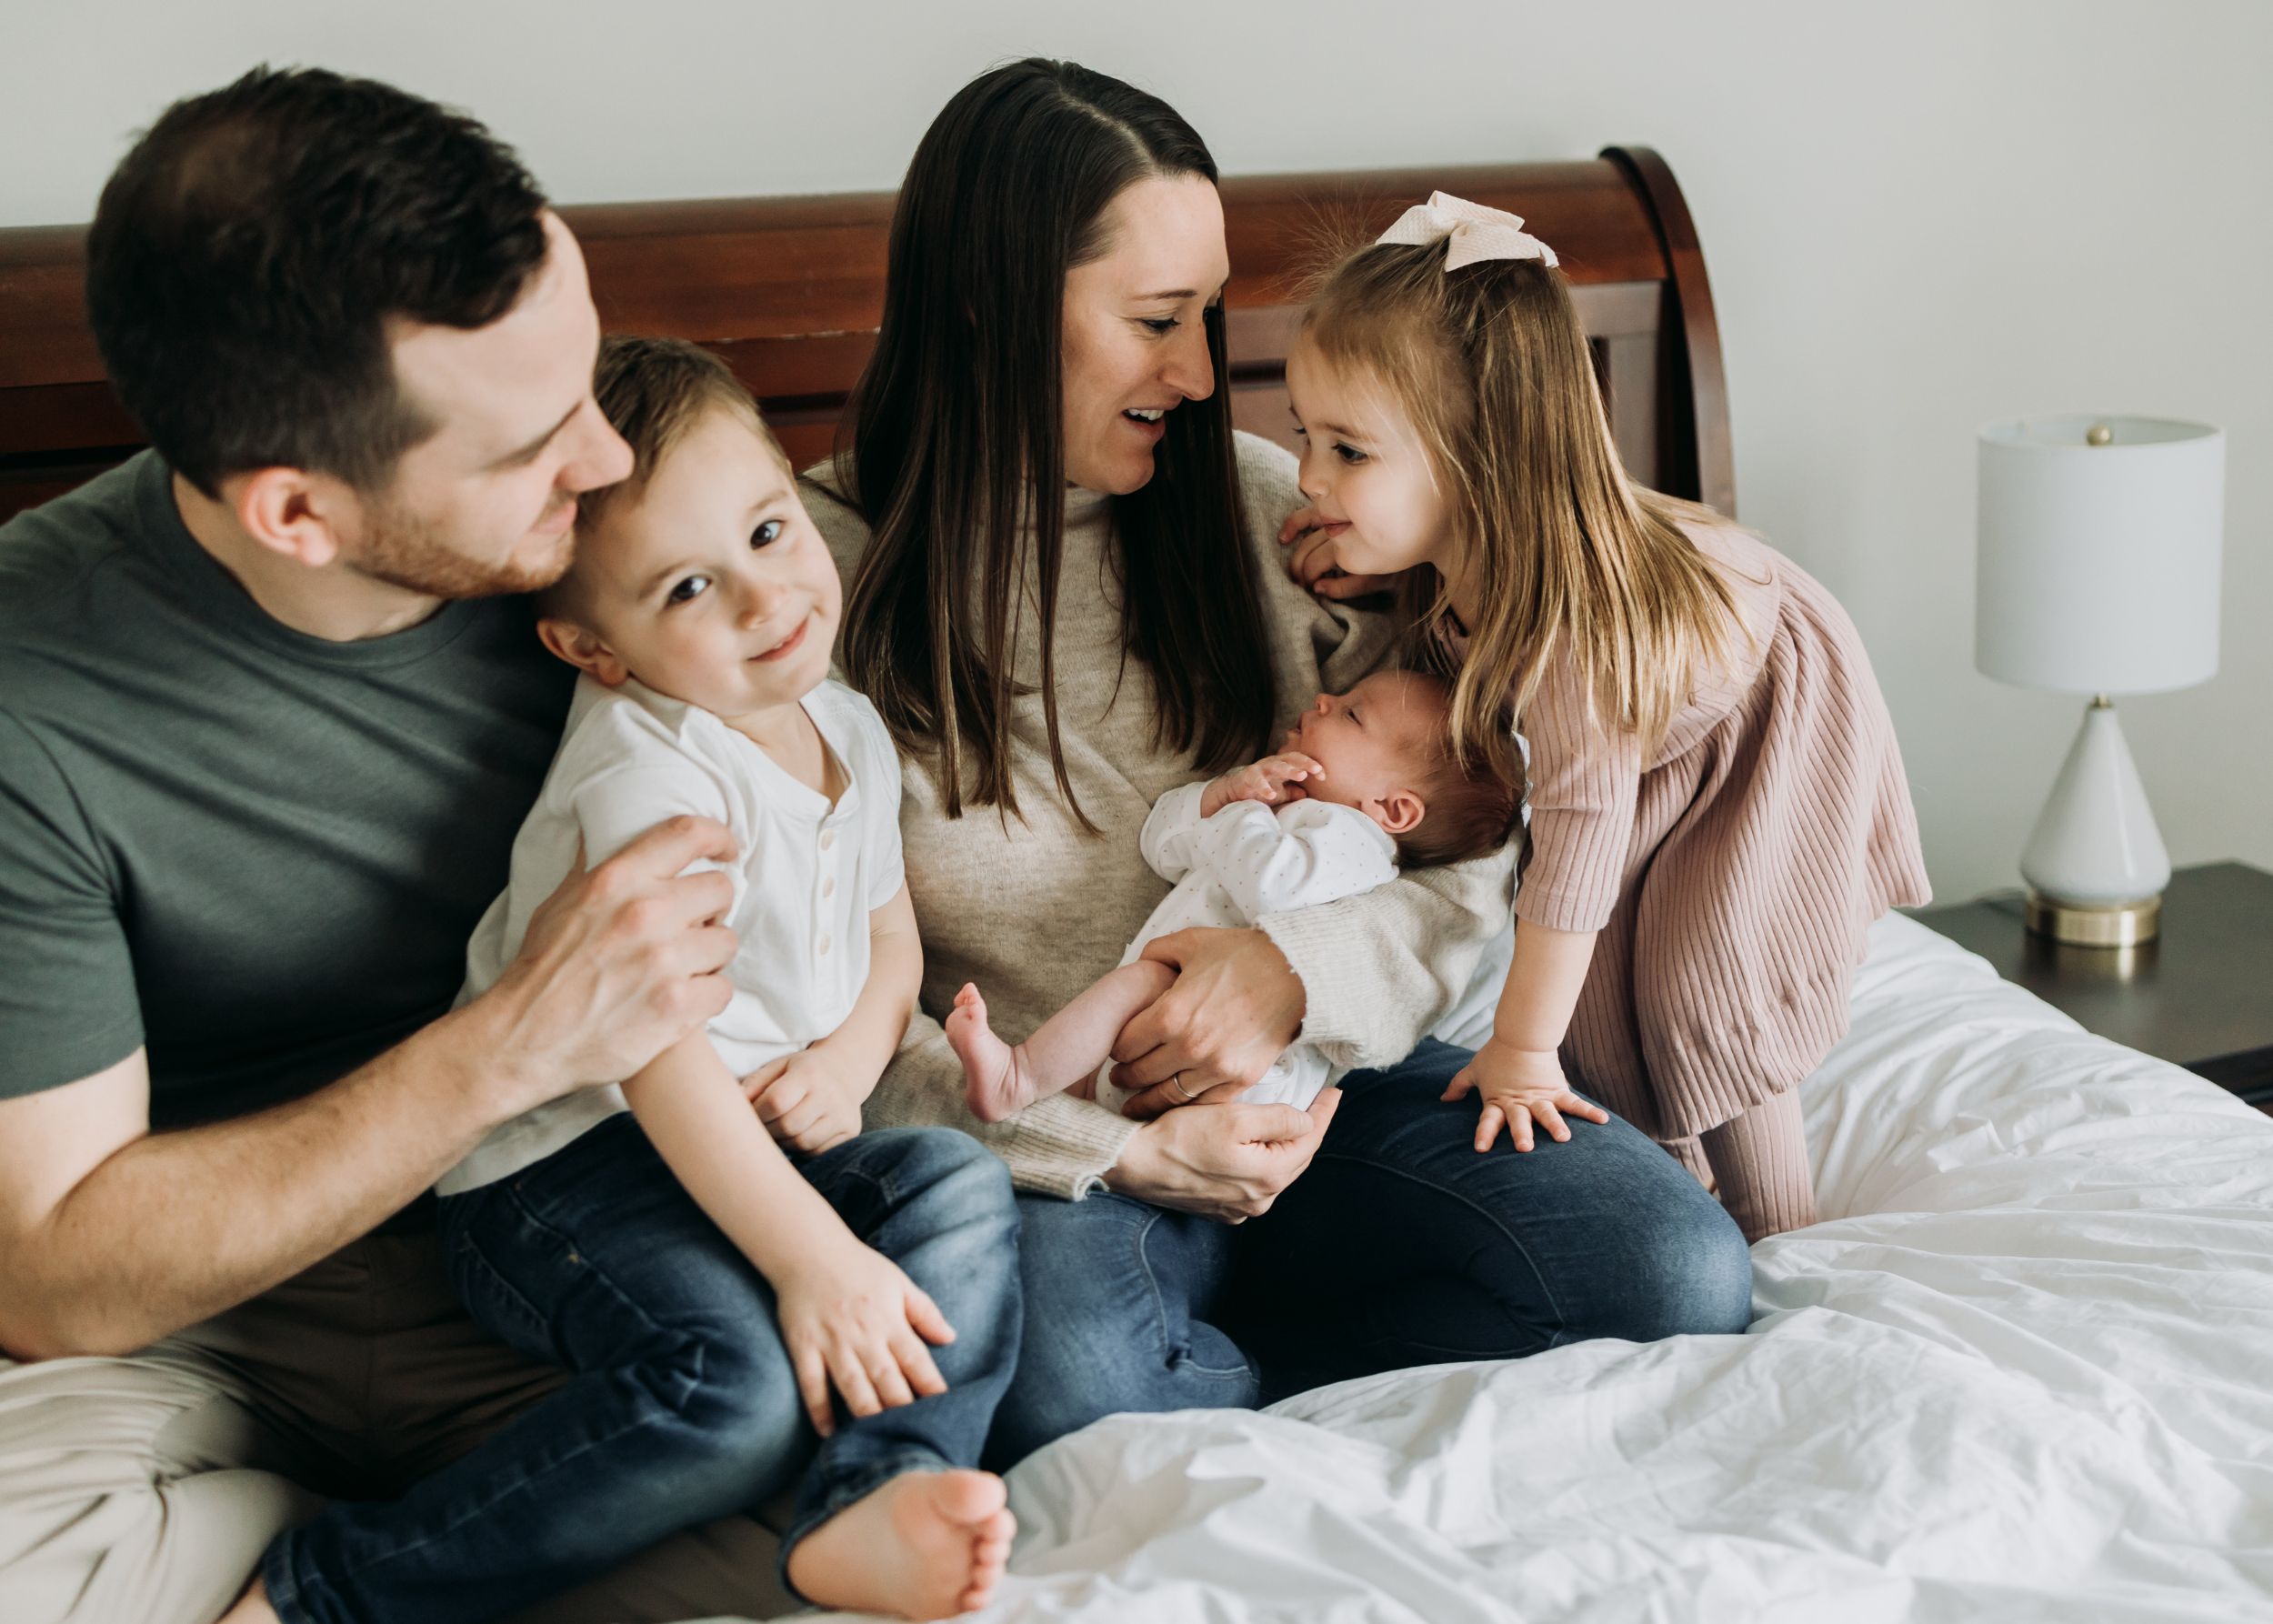 A mom and dad sit on a bed with their toddler son and daughter climbing on them while mom holds their sleeping newborn baby after meeting pittsburgh nannies